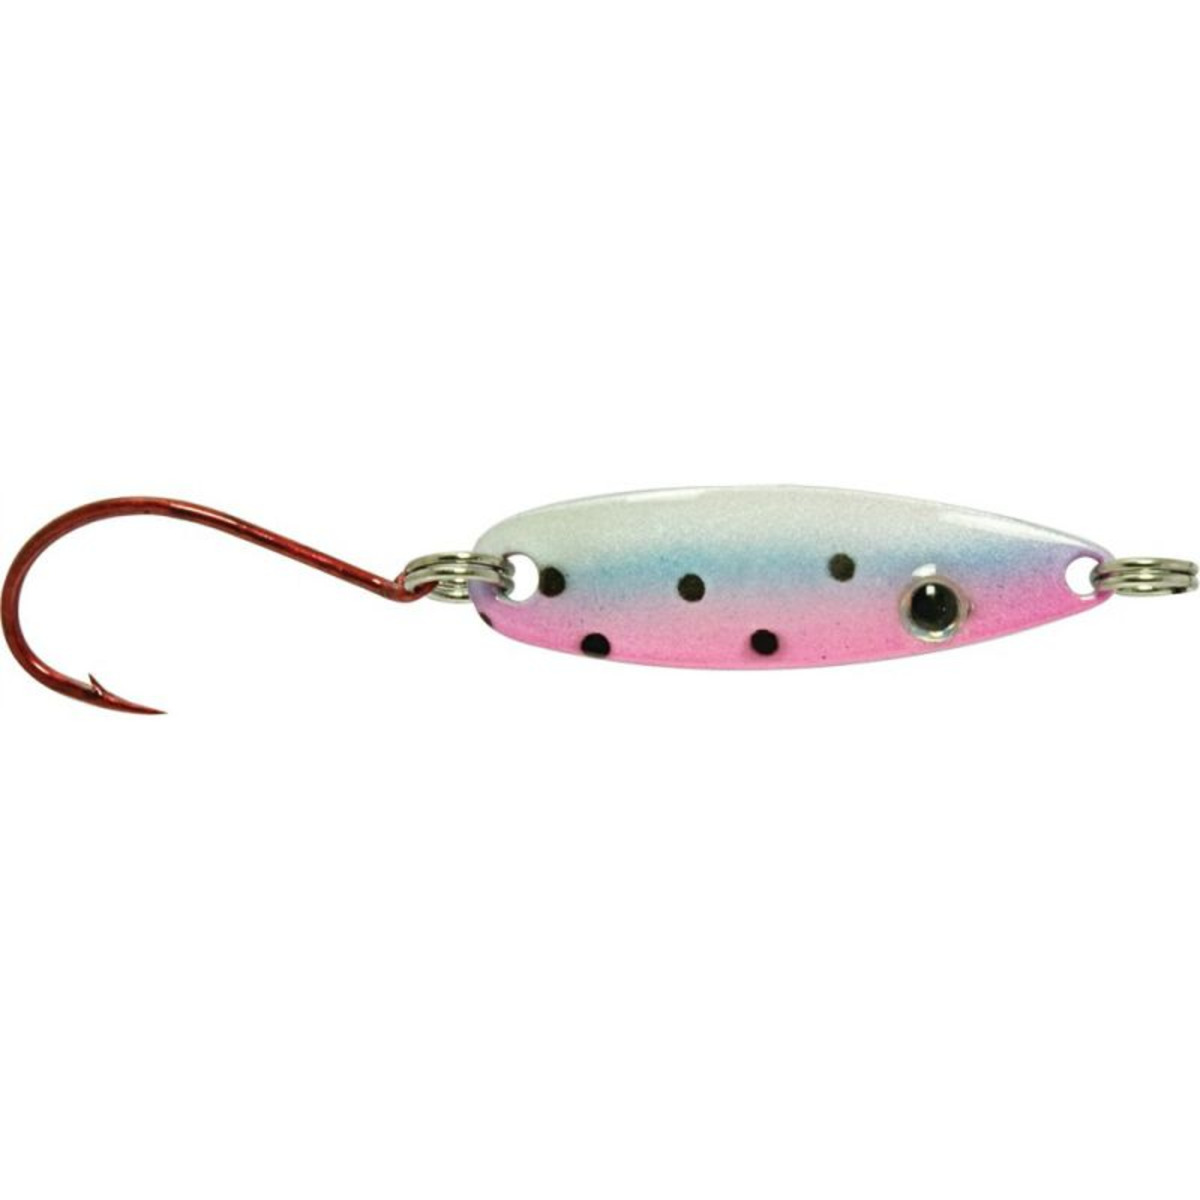 Rapture Silver Trout - 6.0 g - 43 mm - 10 - RT